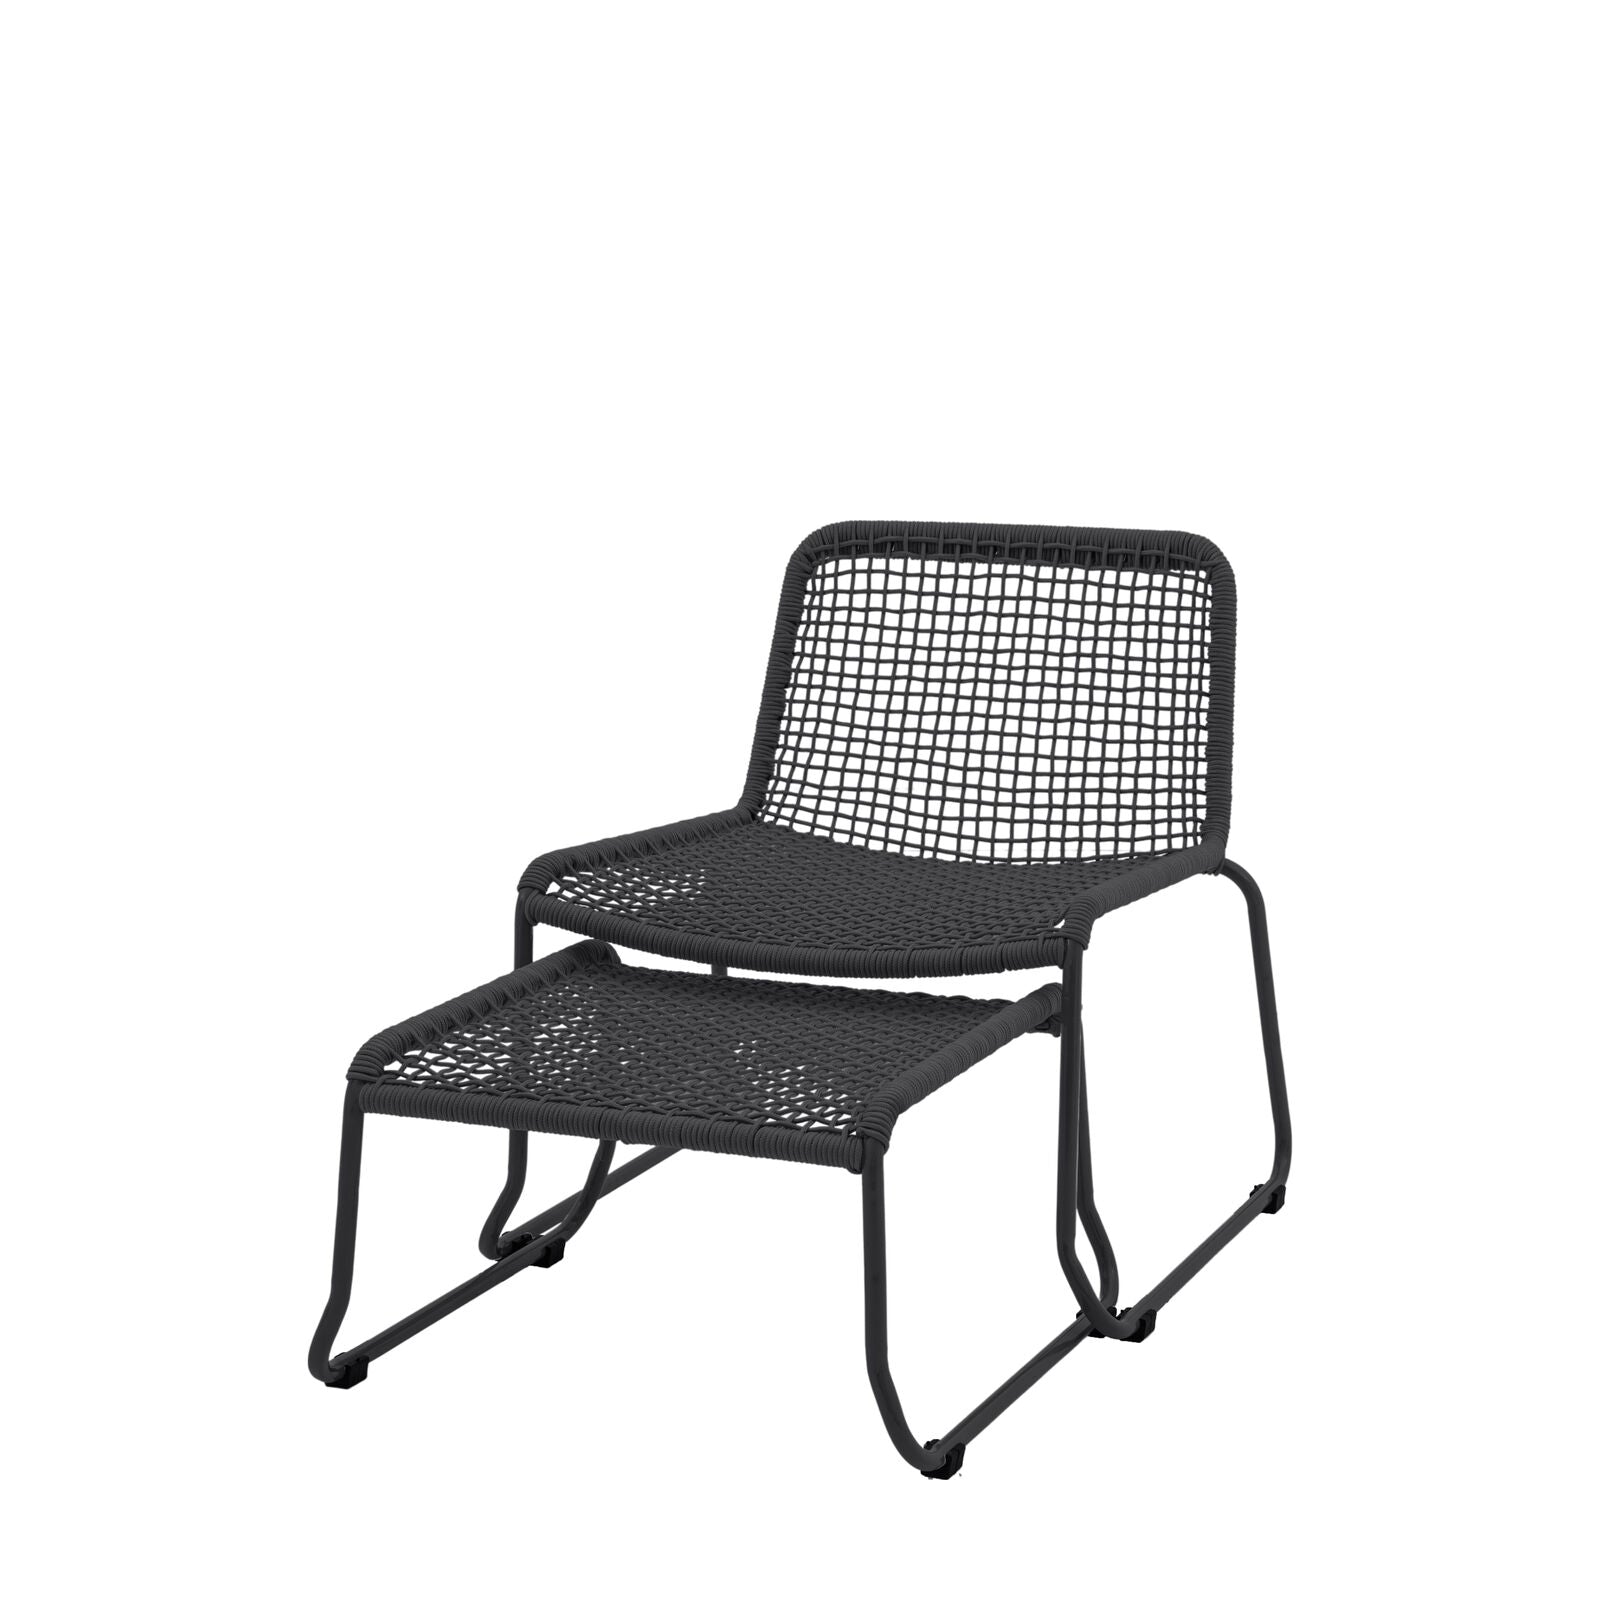 Copy of Brazilia Garden Lounge Chair with Footstool - Black - Living In Kin